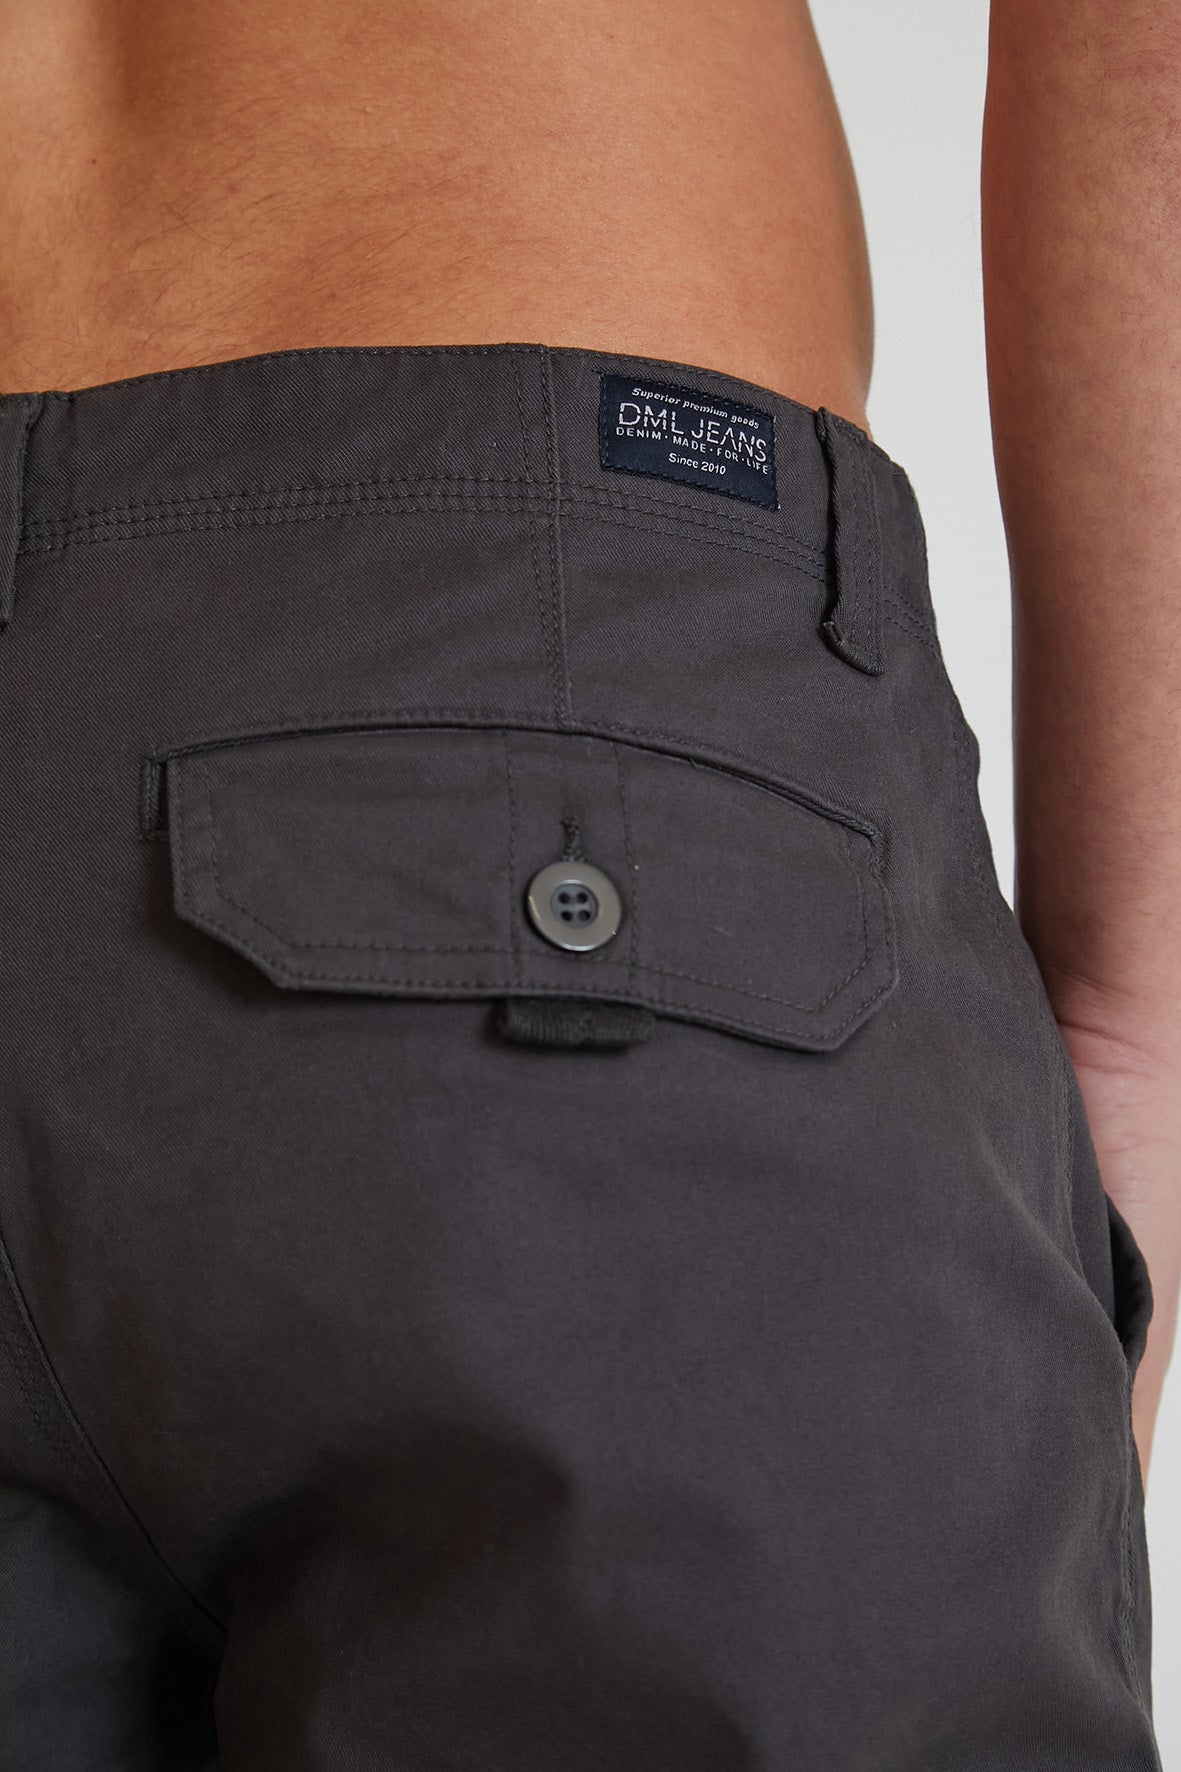 LOW STOCK! NIGHTHAWK Cargo pant in premium cotton twill - CHARCOAL